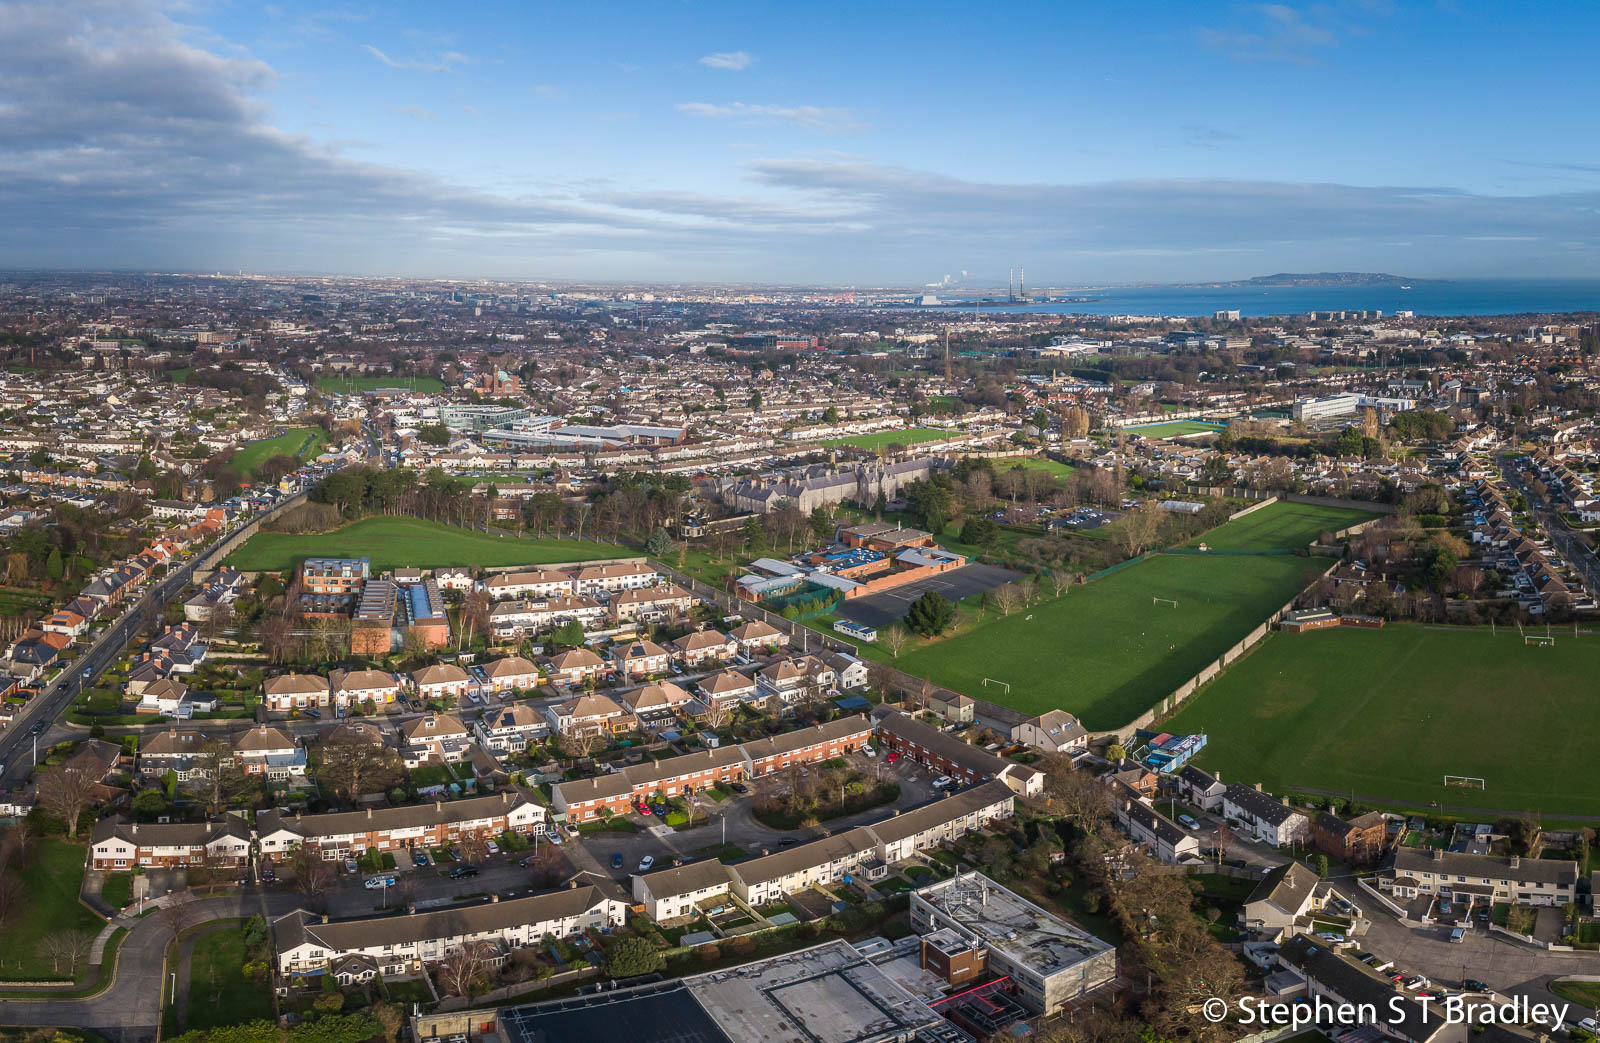 Aerial drone photography and video production services Dublin and Ireland portfolio - commercial aerial photography of the Dundrum suburb of Dublin Ireland. Photo 2